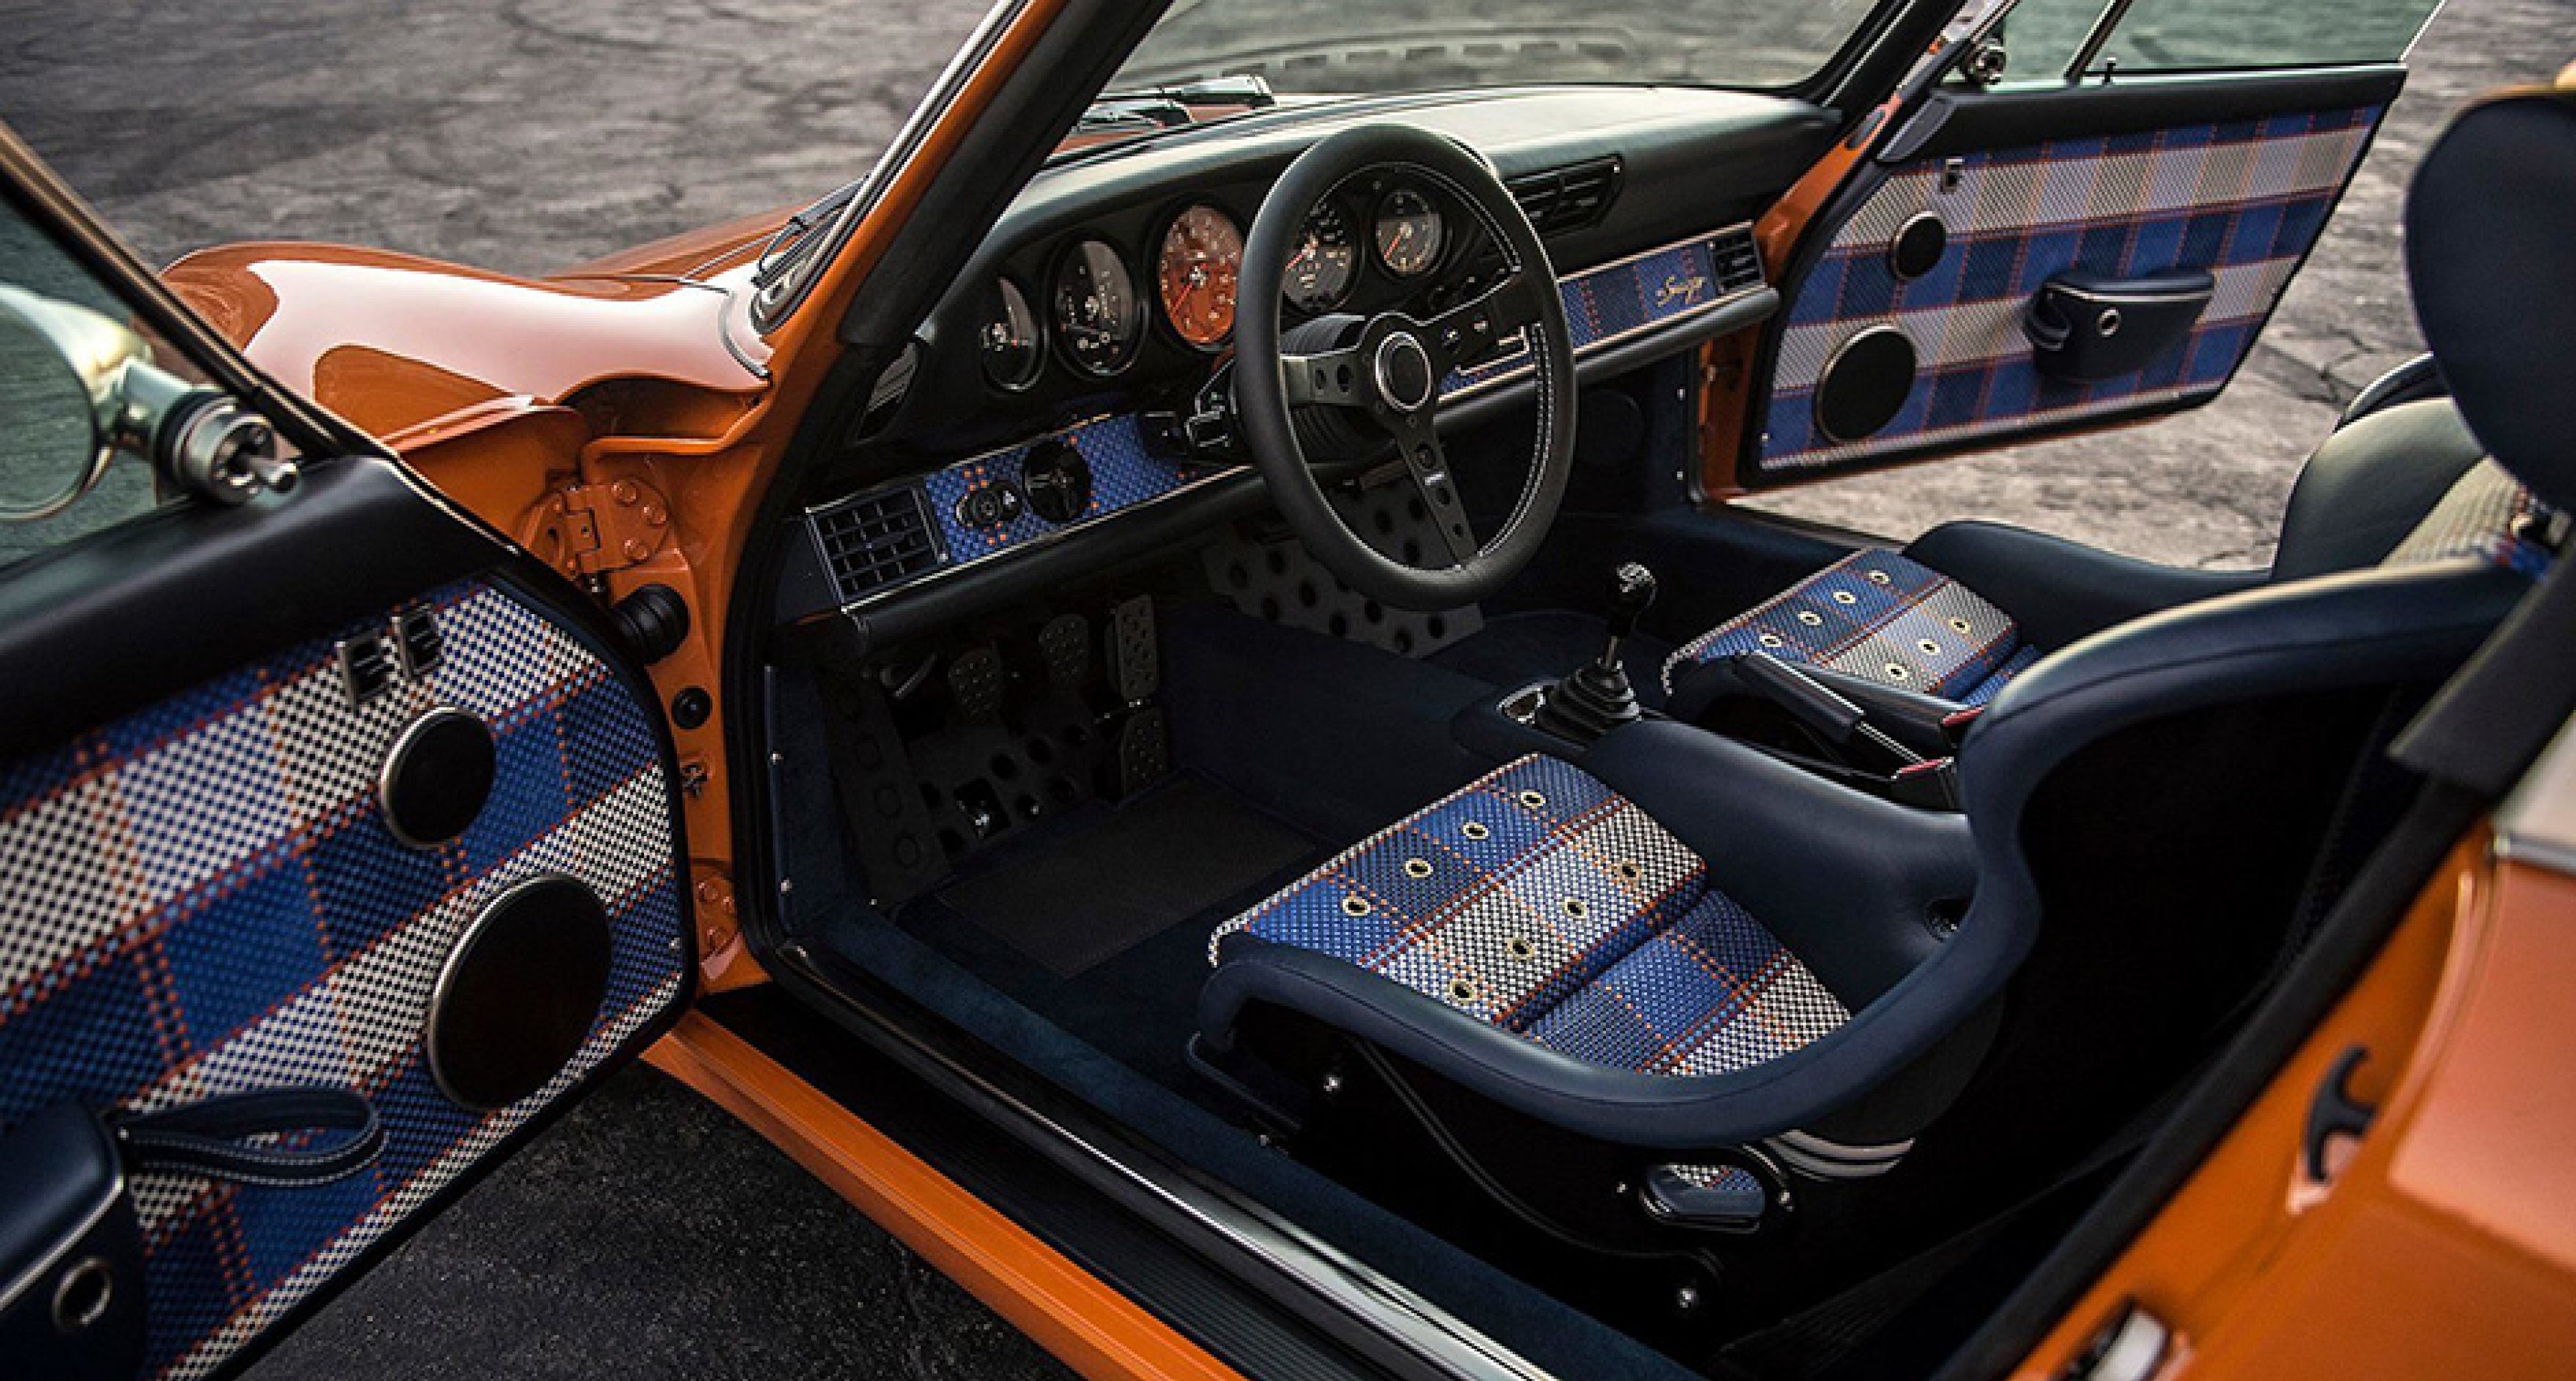 Singer’s latest restomod 911 has the wildest interior you’ve ever seen